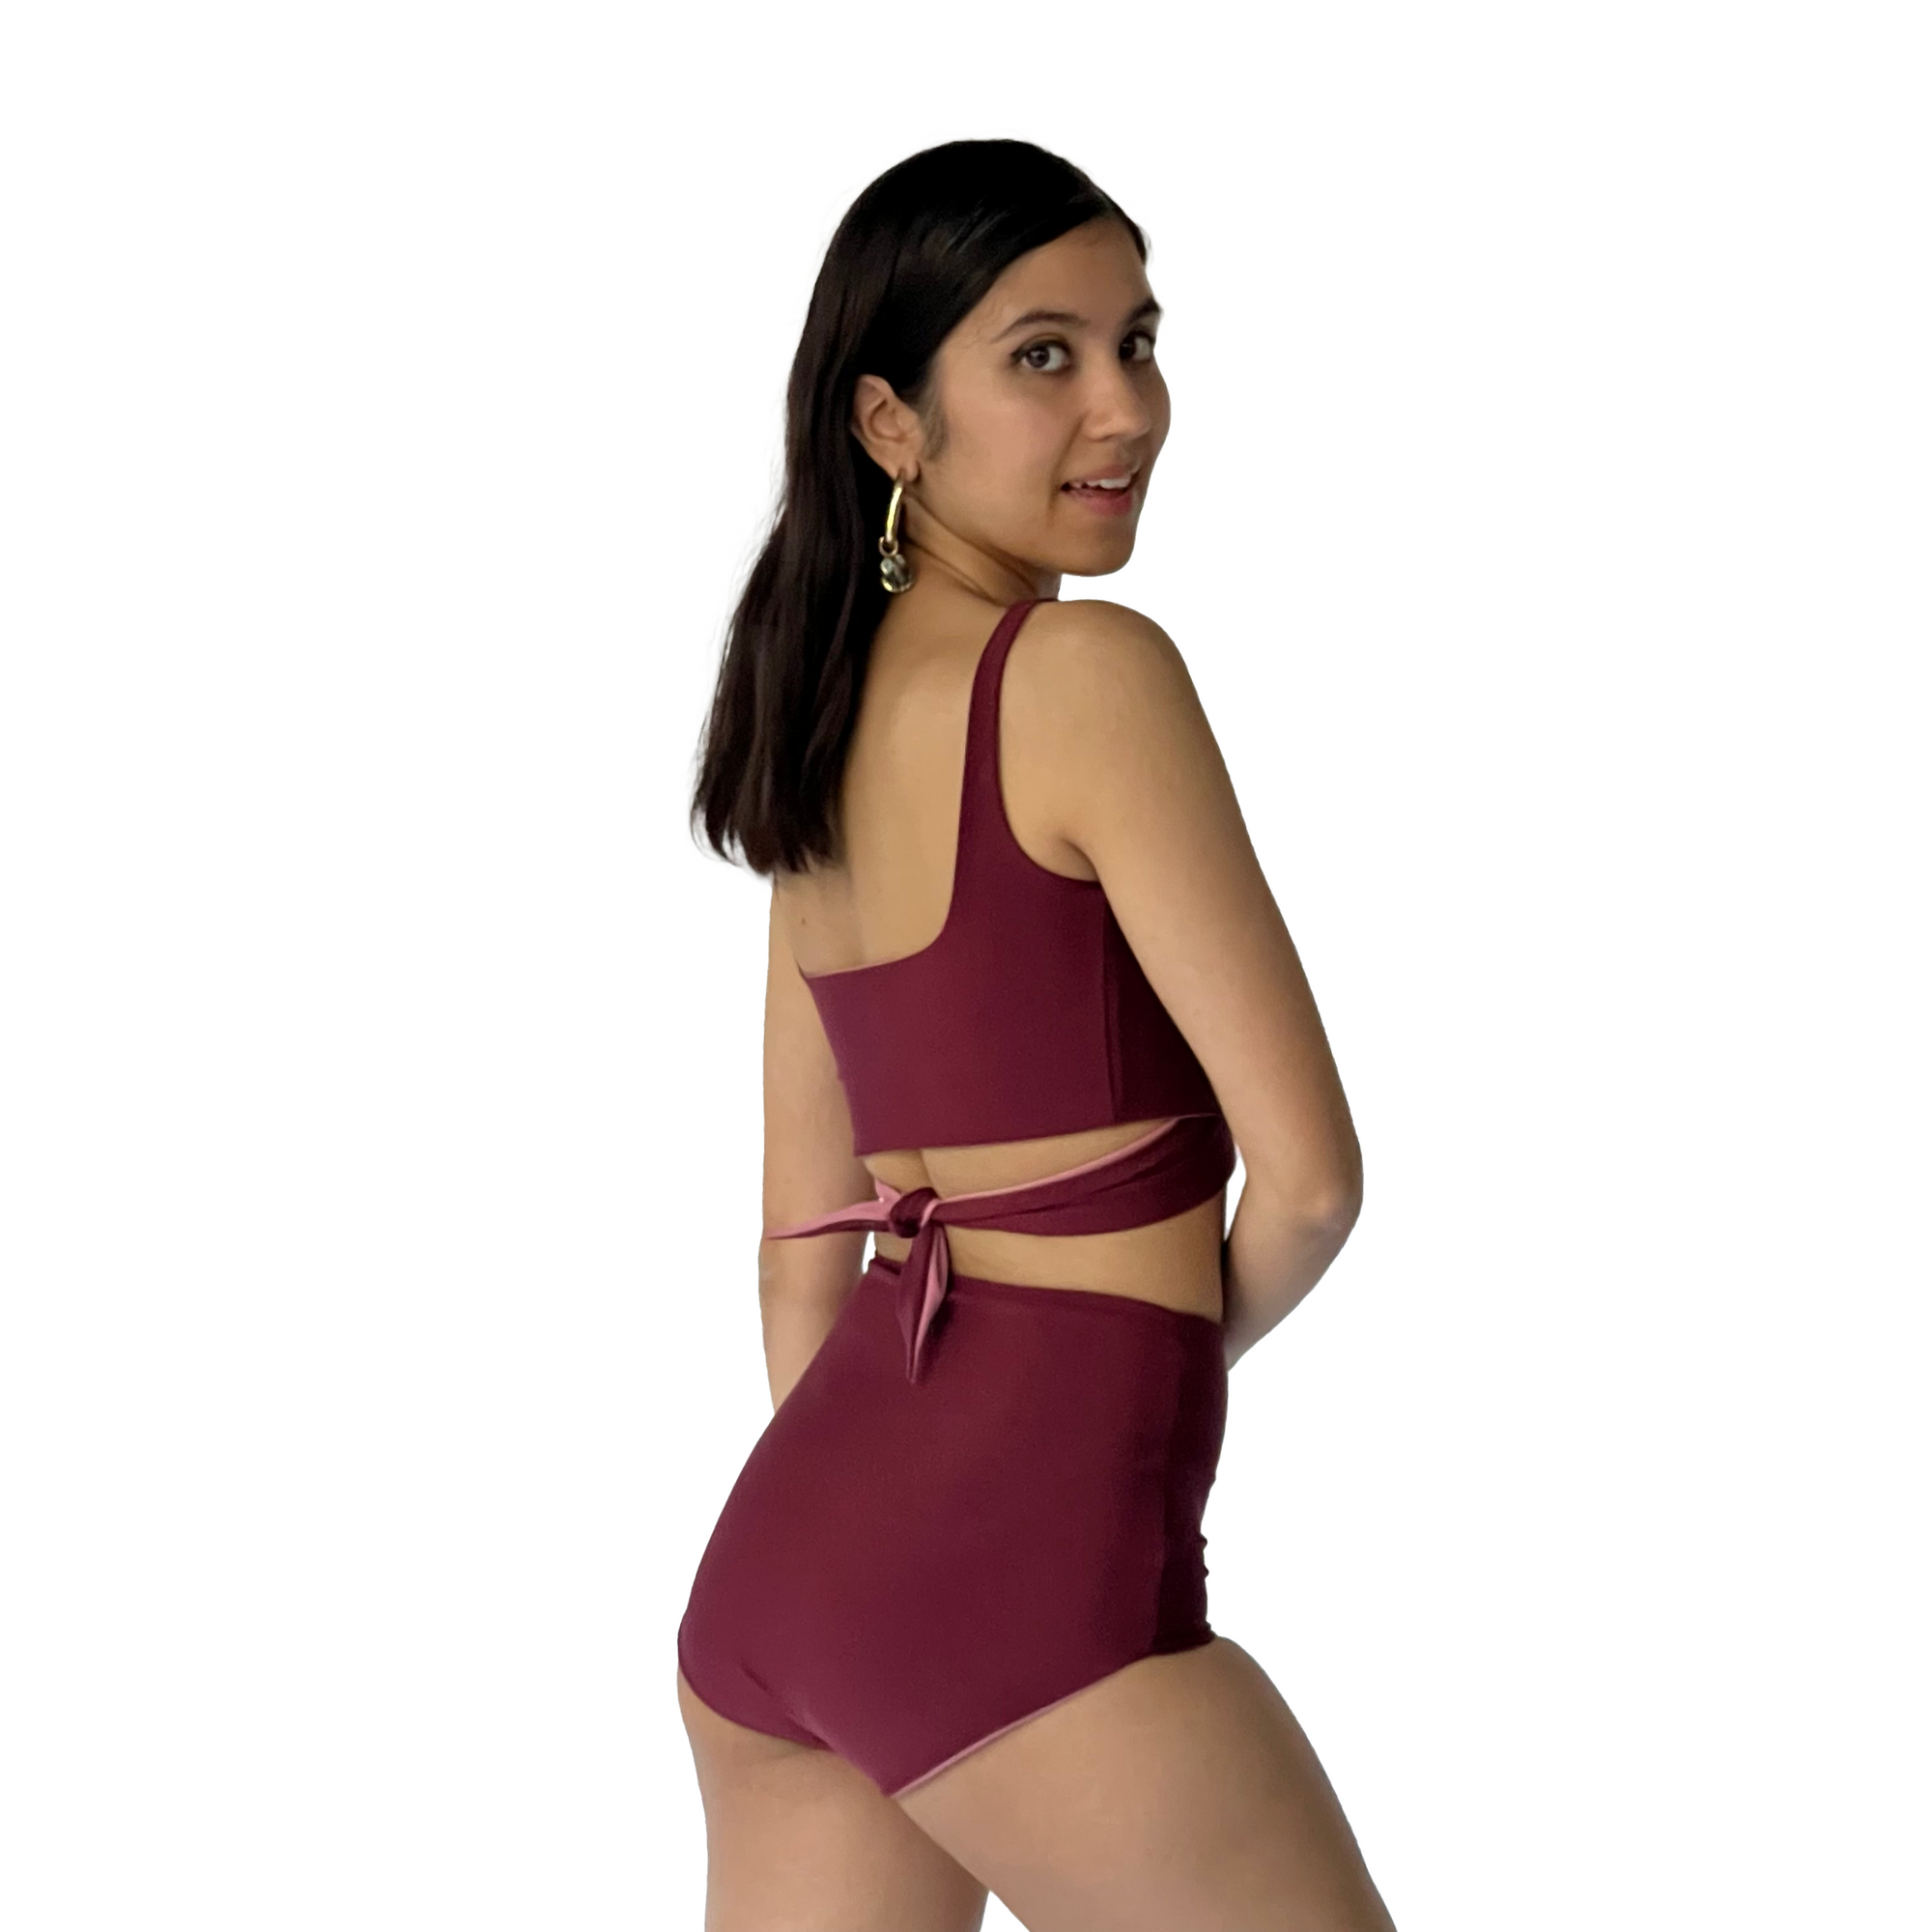 Magic Top Reversible - Blush + Wine (High Support)